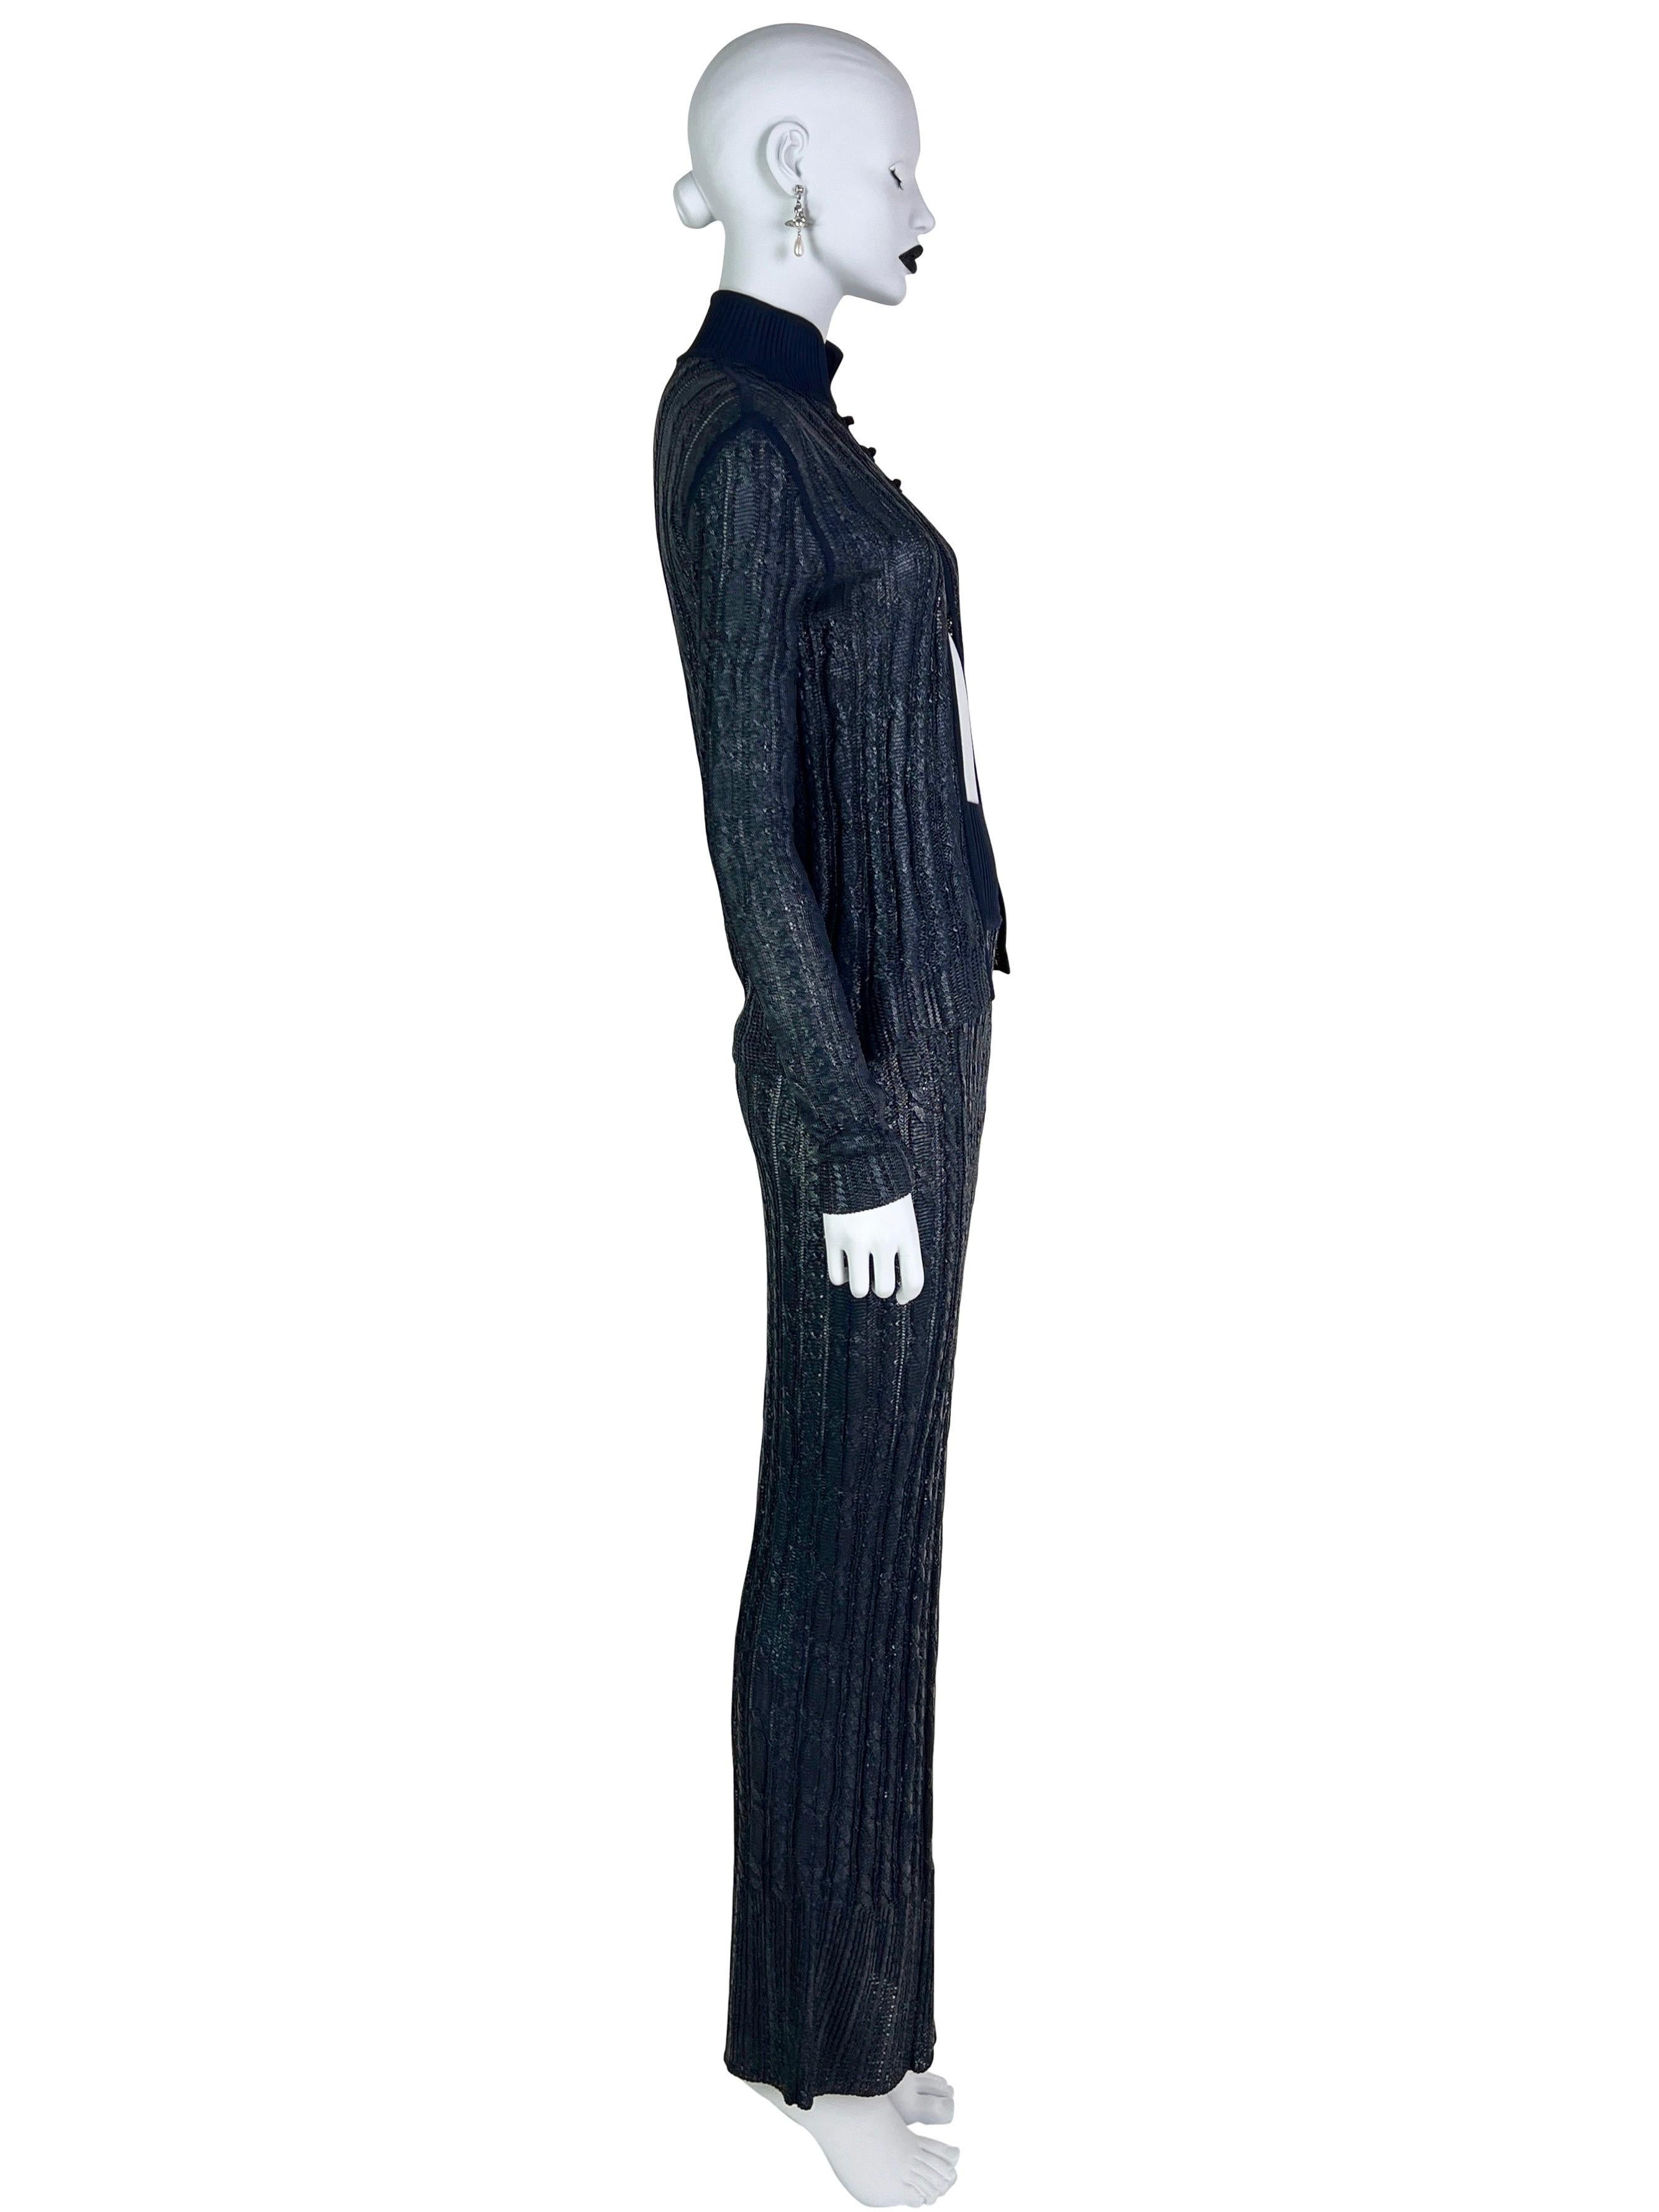 SS 1999 Dior by John Galliano RTW Rubber Knit 3-pieces ensemble For Sale 3